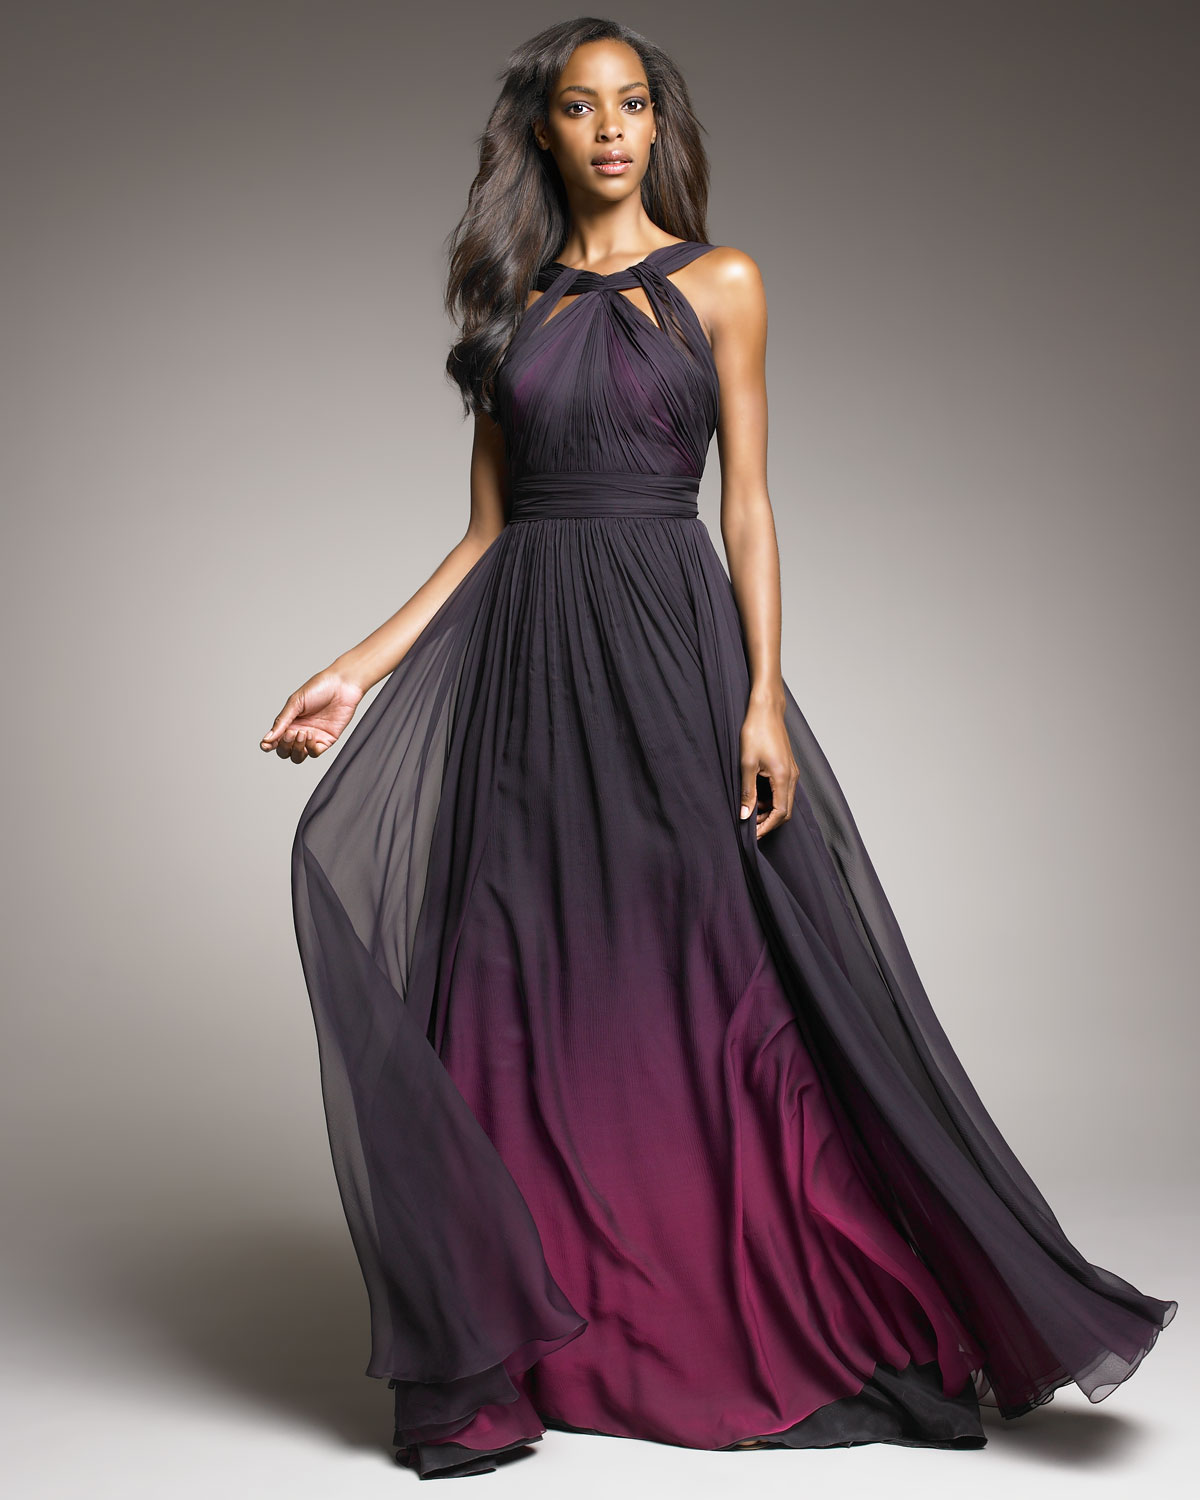 Black and purple ombre dress Ombre gown, Gowns, Ombre dress